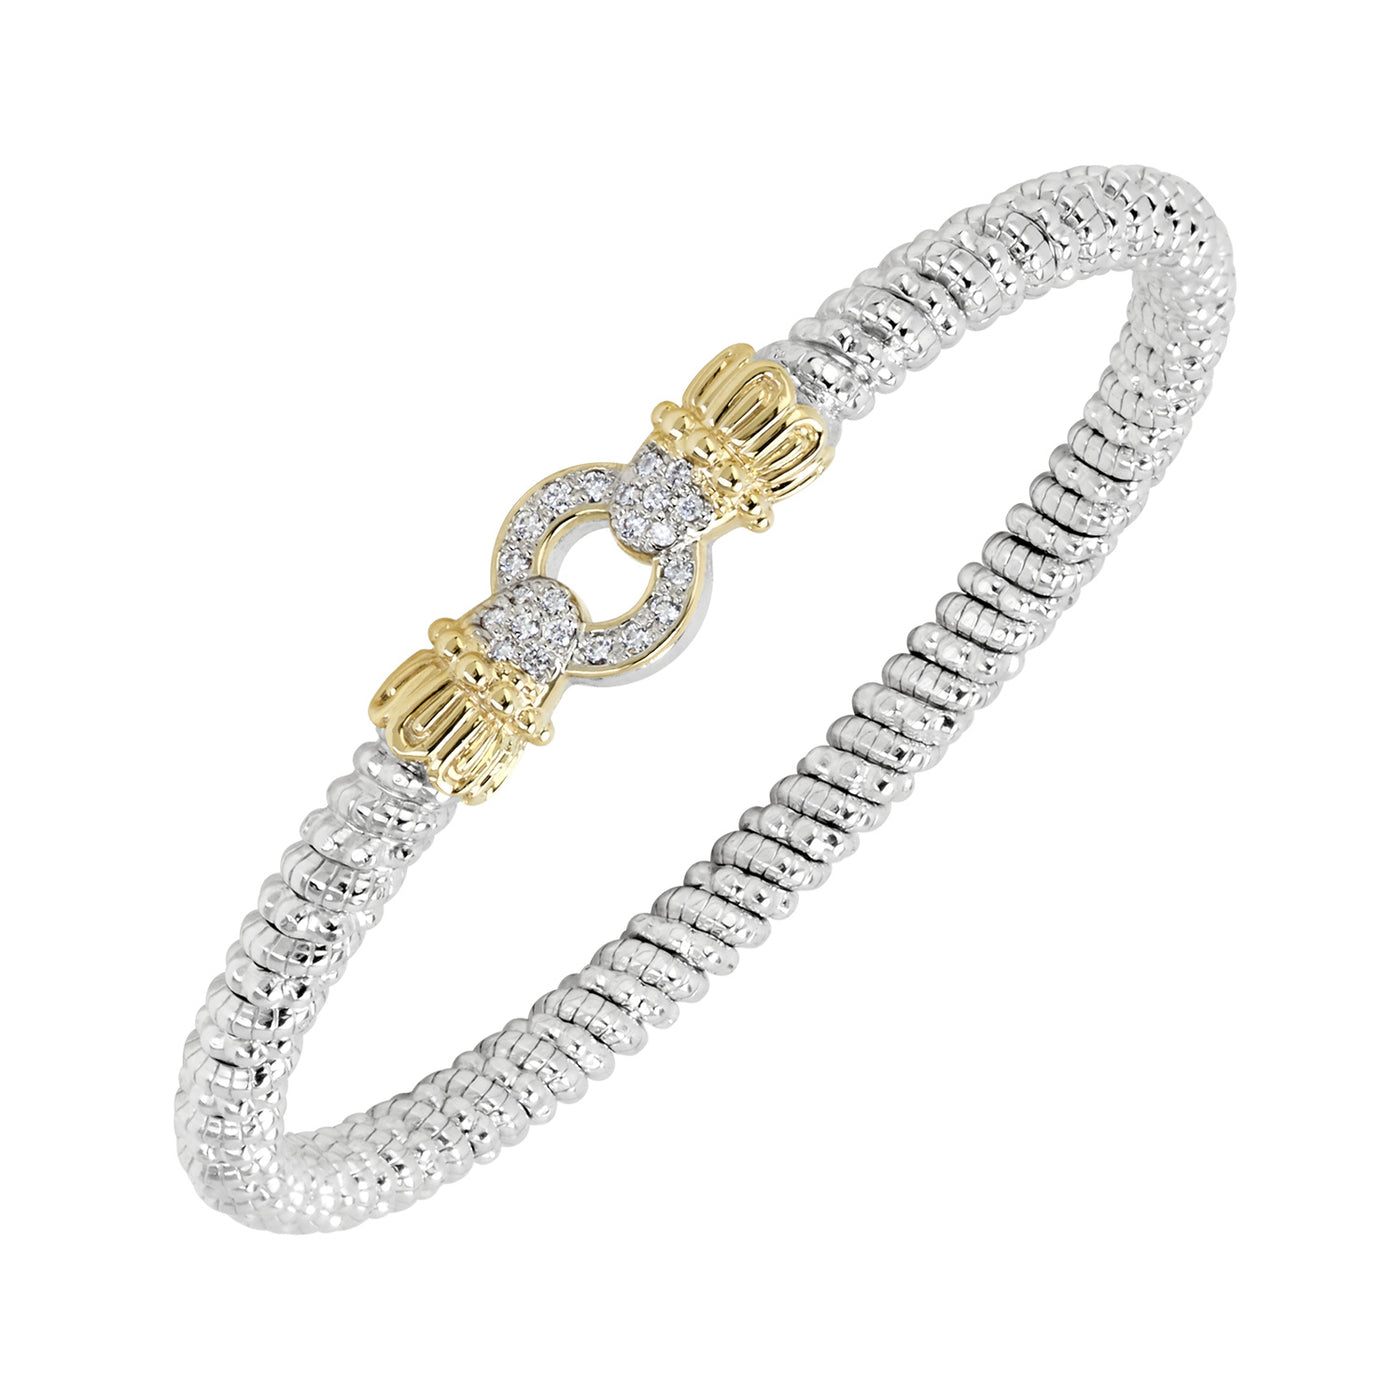 Vahan Sterling Silver and 14k Yellow Gold Moiré Beaded® Bangle Bracelet with Diamonds – 22837D04